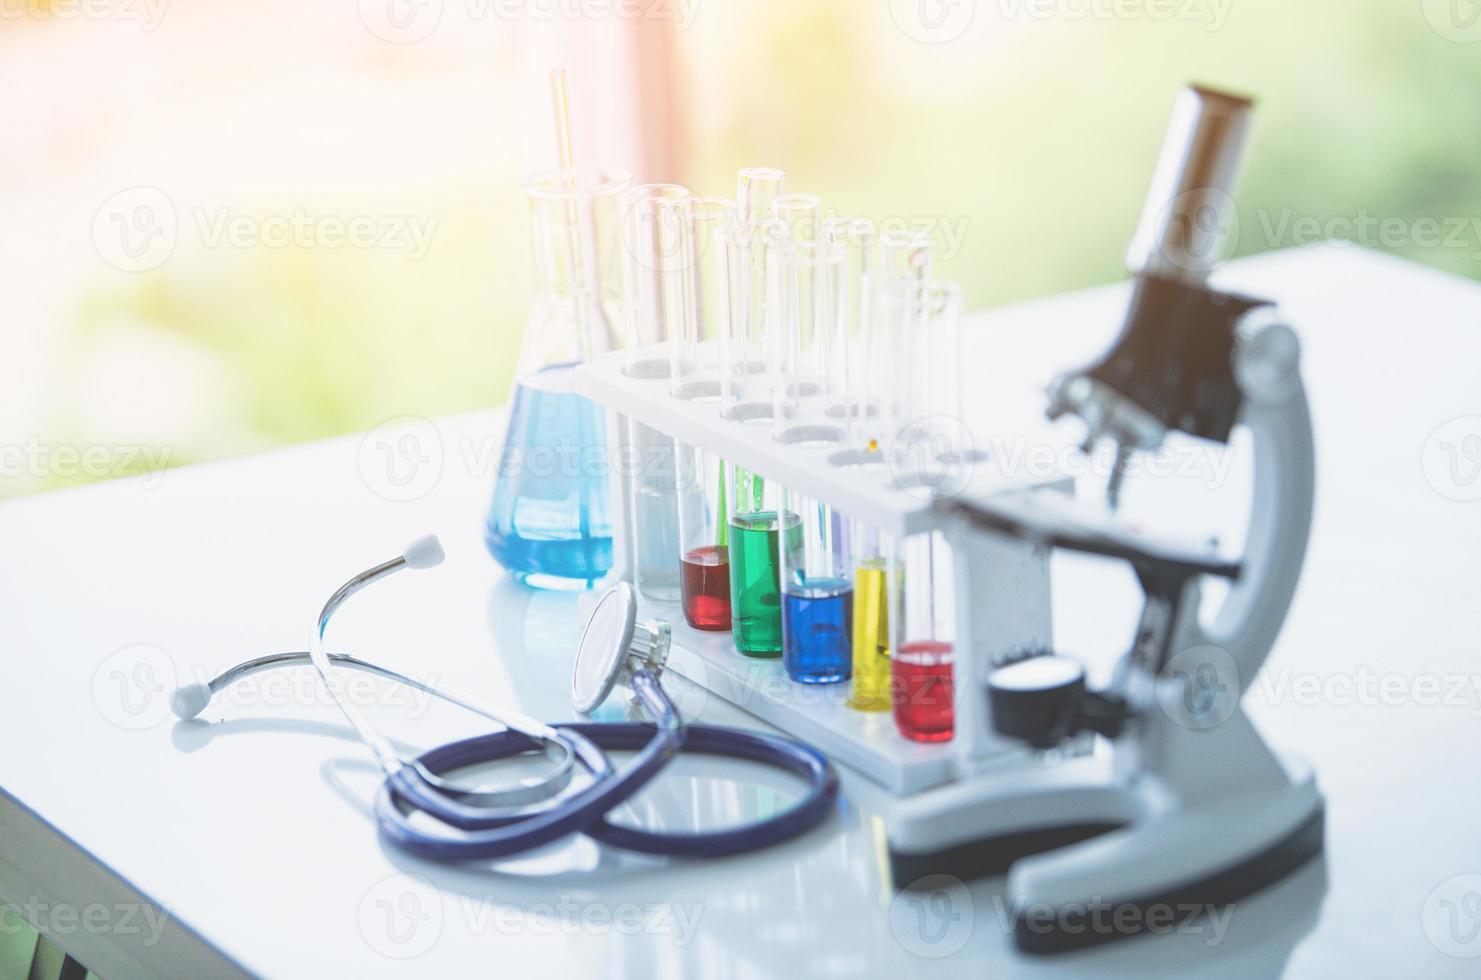 Microscope and colorful test tubes on table in Laboratory. Science chemistry concept. Blue tone photo